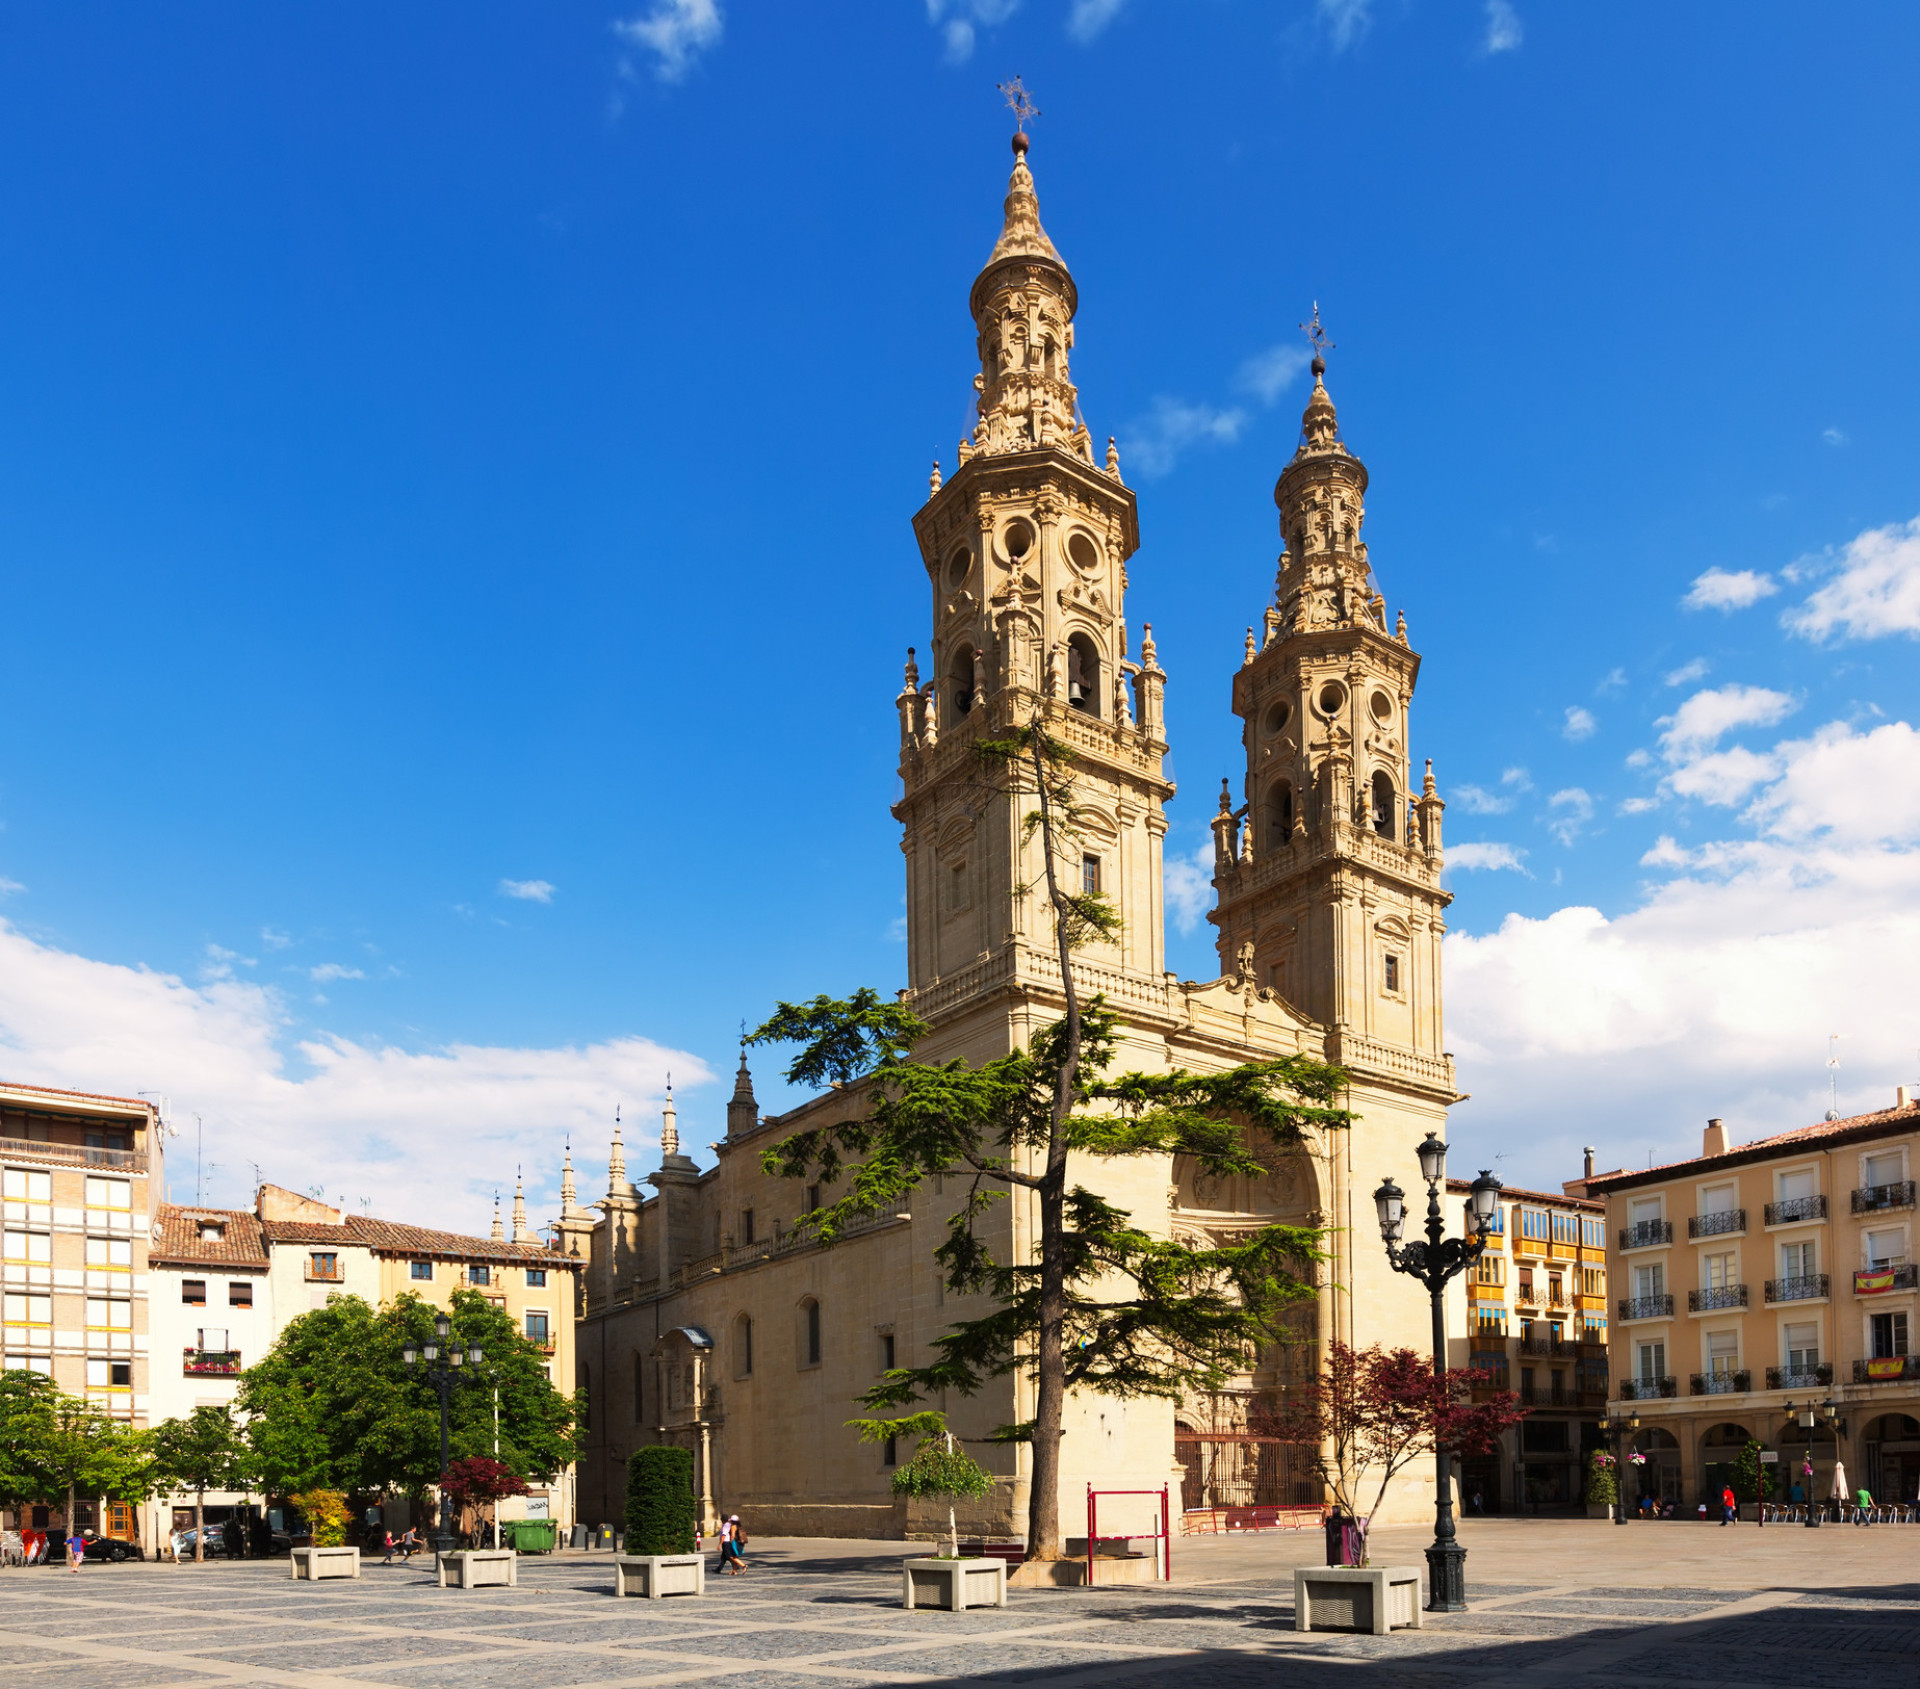 The region's capital, Logroño, makes an ideal base. Cultural draws include the ornate Catedral de Santa María de la Redonda, built between the 15th and 18th centuries.<p><a href="https://www.msn.com/en-us/community/channel/vid-7xx8mnucu55yw63we9va2gwr7uihbxwc68fxqp25x6tg4ftibpra?cvid=94631541bc0f4f89bfd59158d696ad7e">Follow us and access great exclusive content every day</a></p>